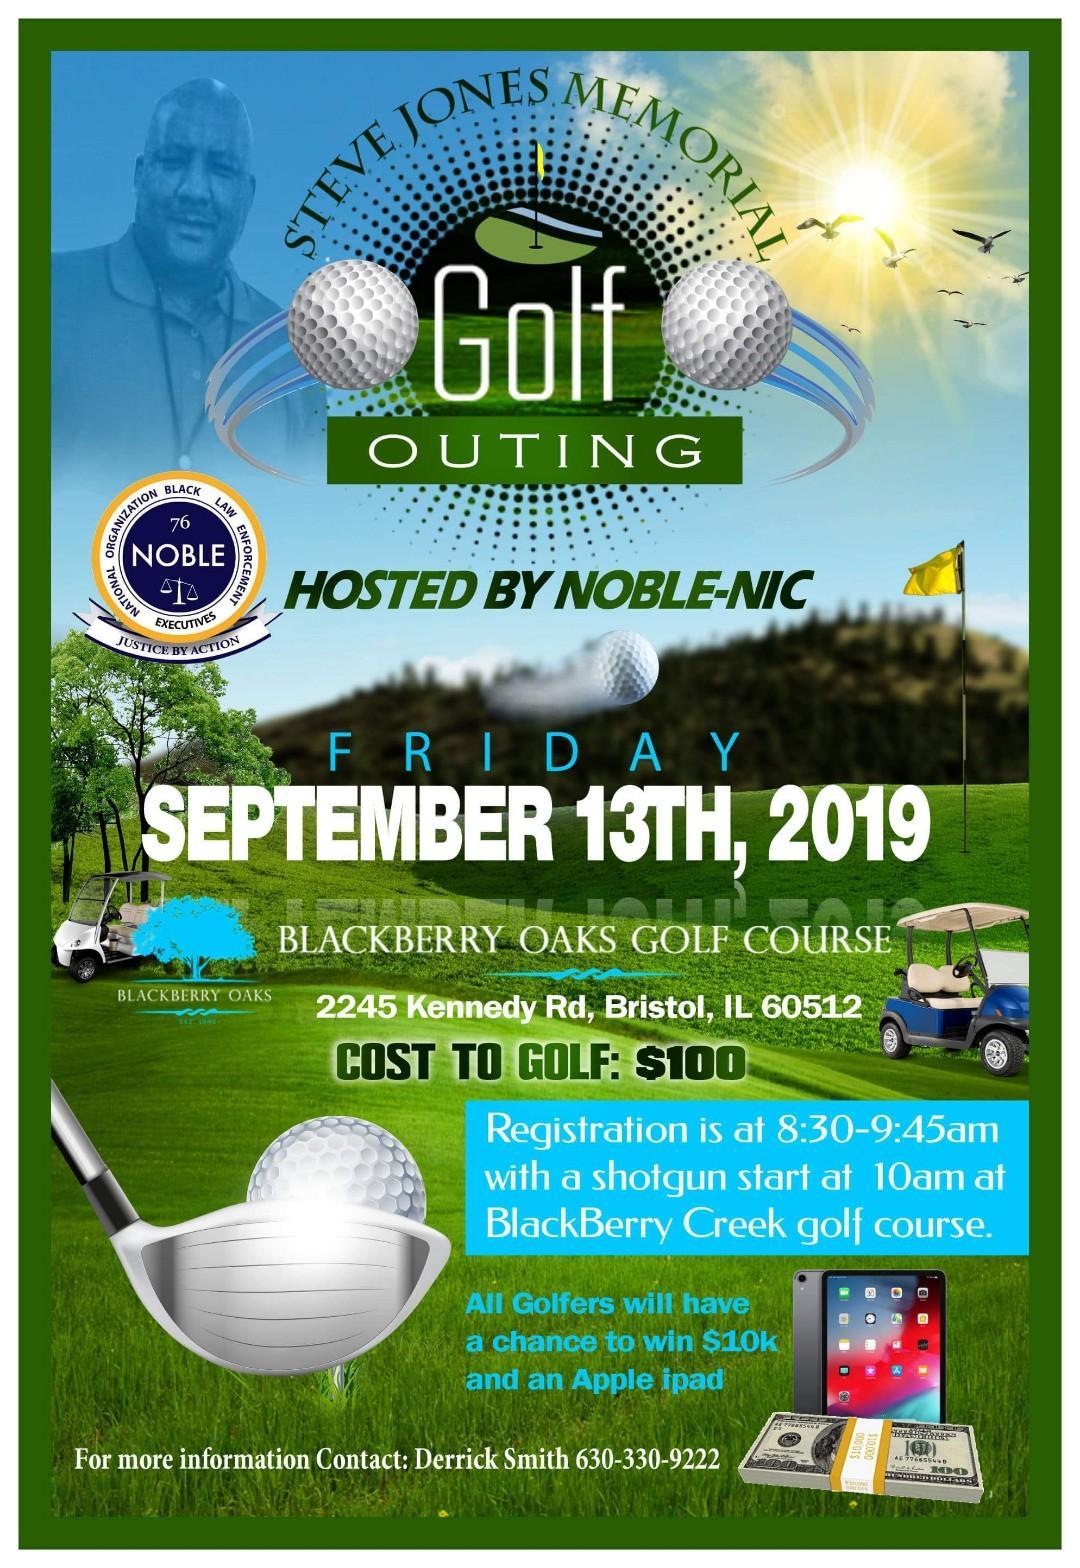 "Steve Jones Memorial" Golf Outing Hosted By Noble-NIC